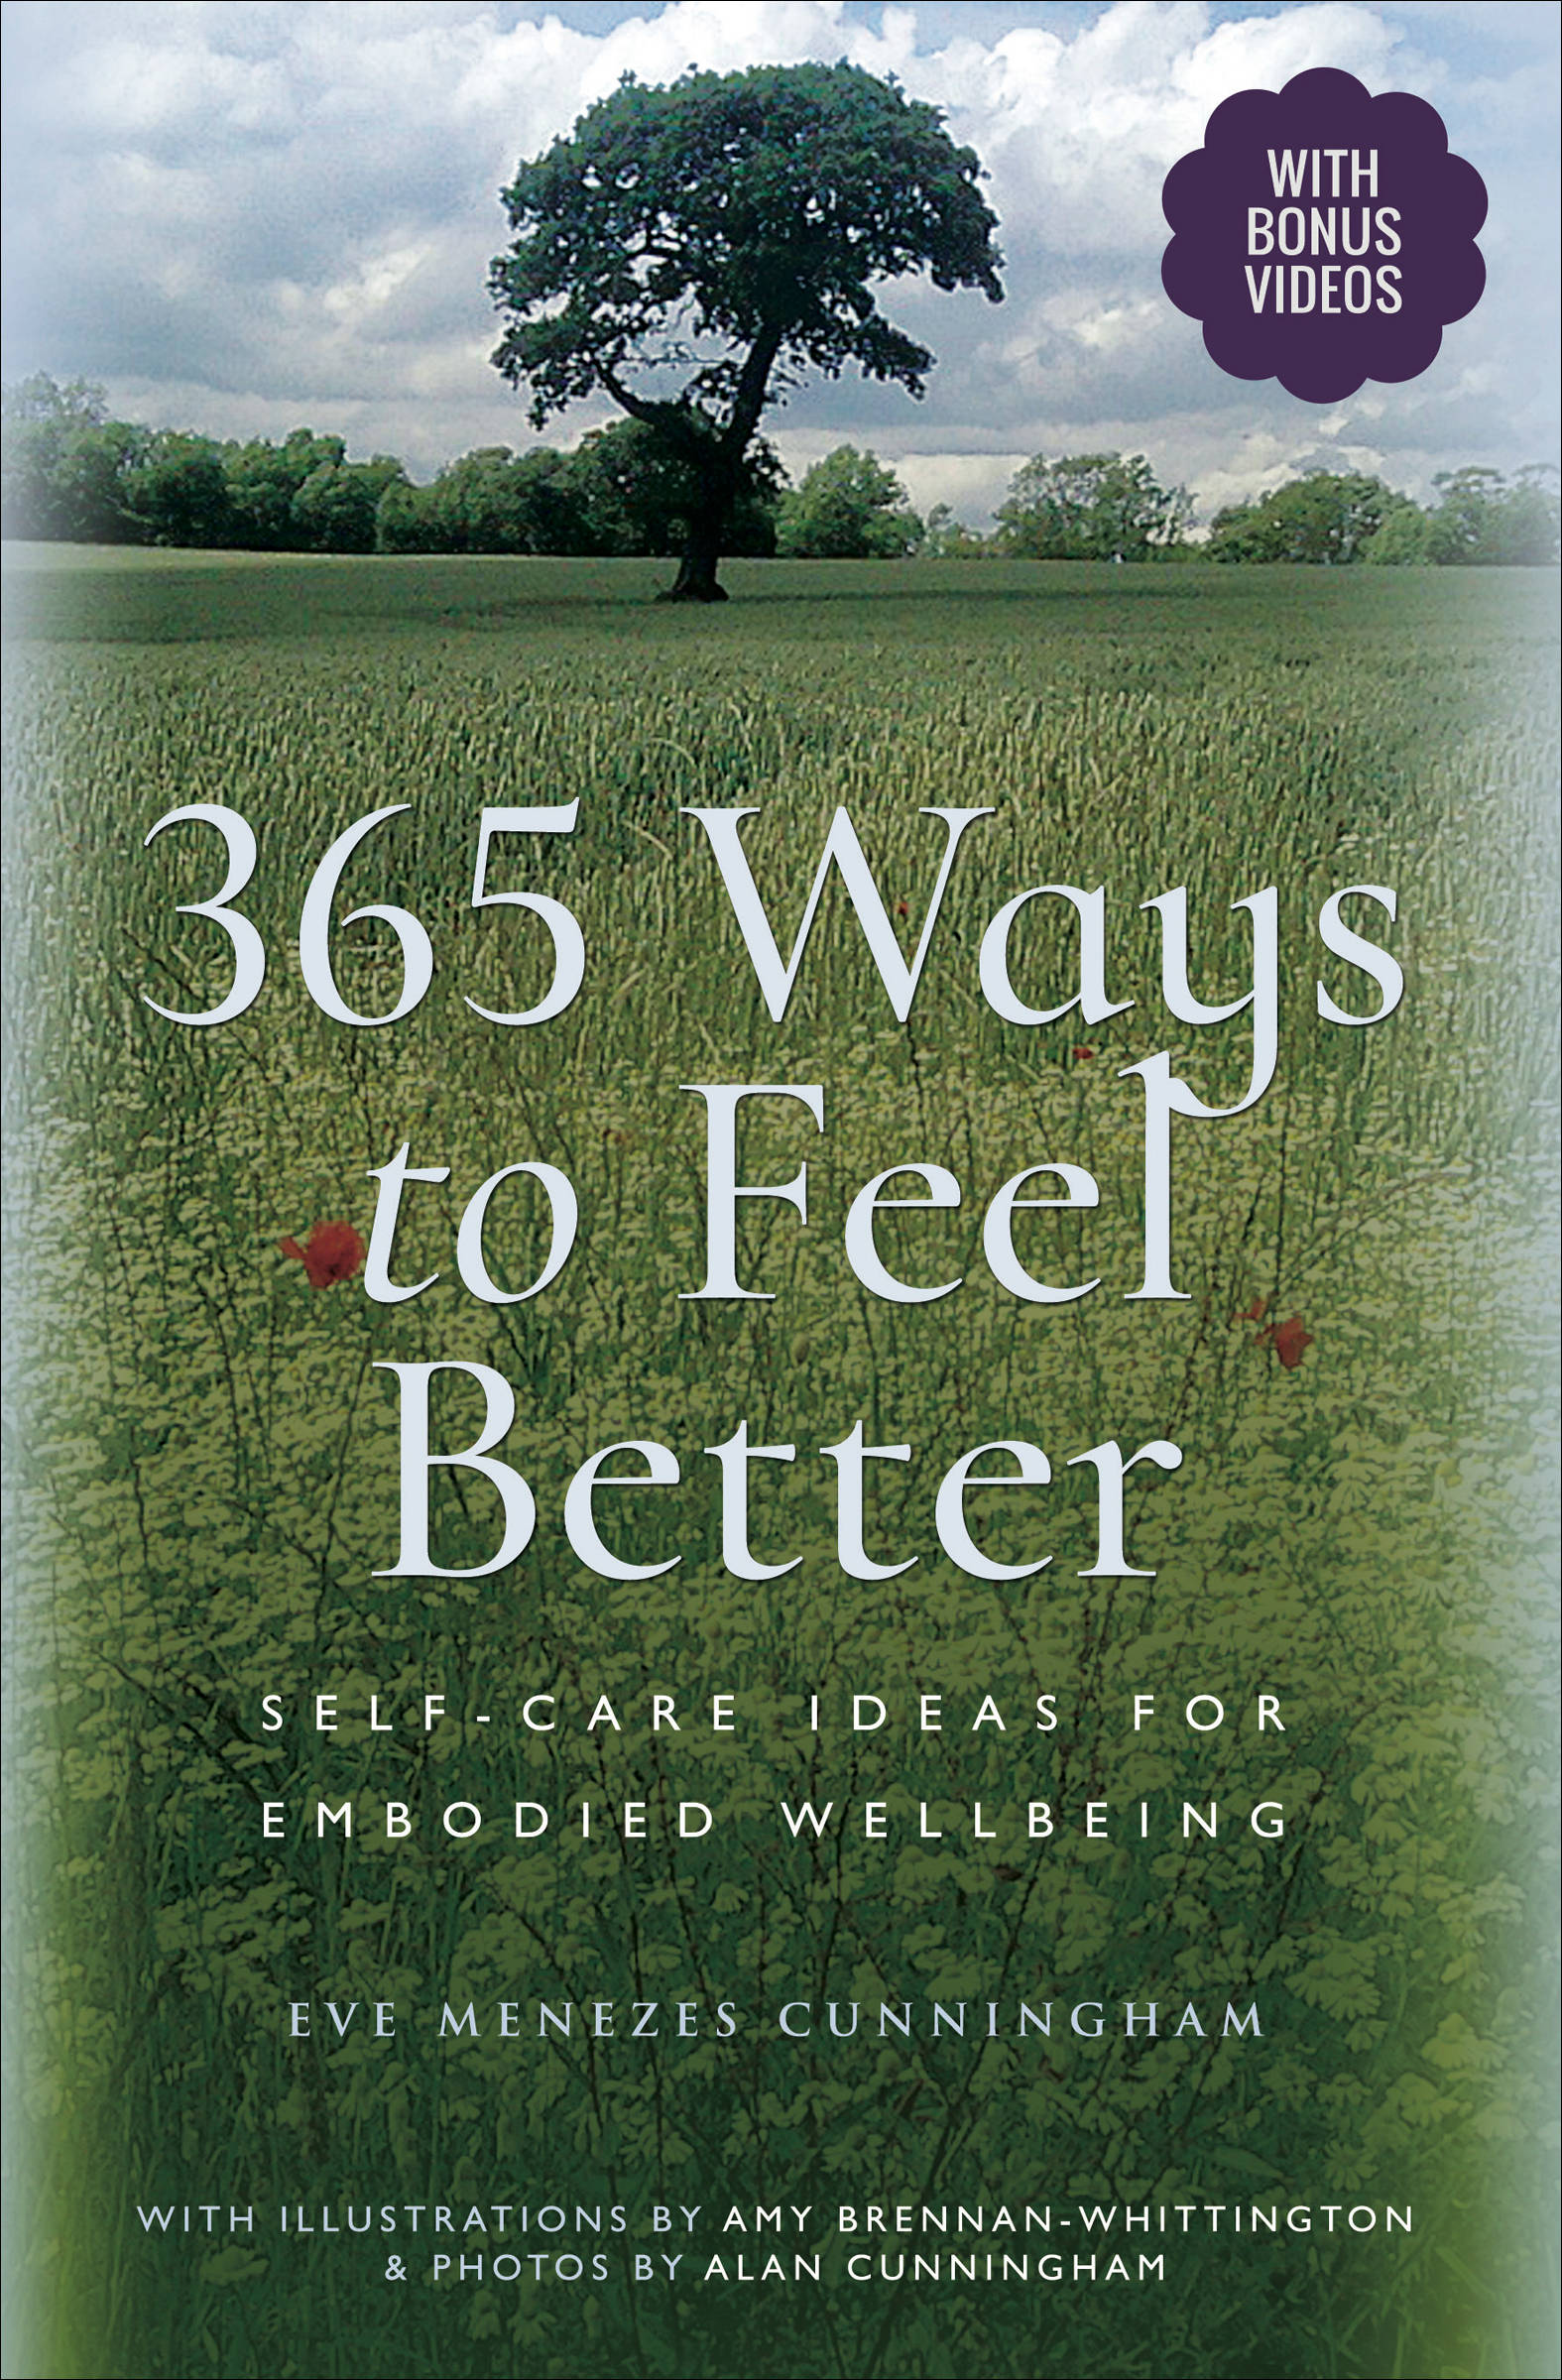 365 Ways to Feel Better